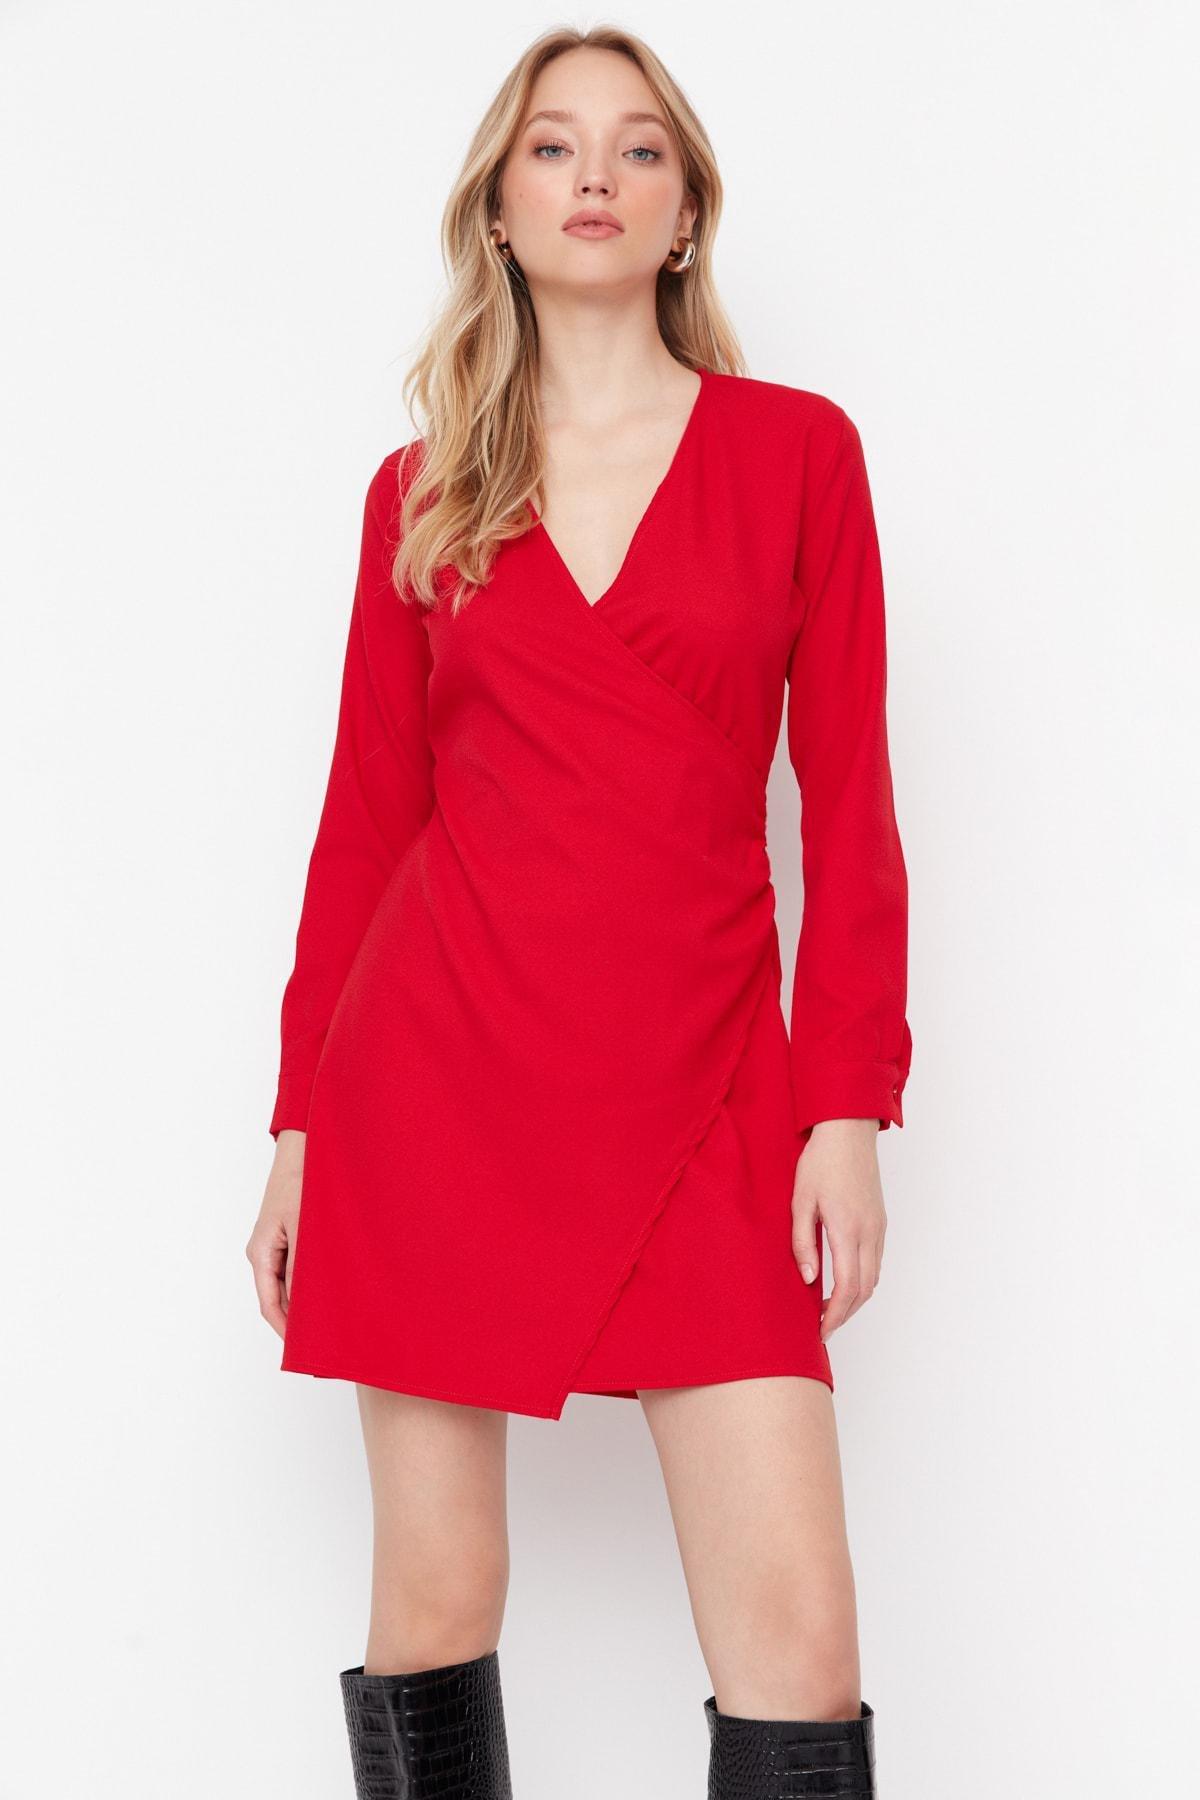 Trendyol - Red Cache-Coeur A-Line Dress